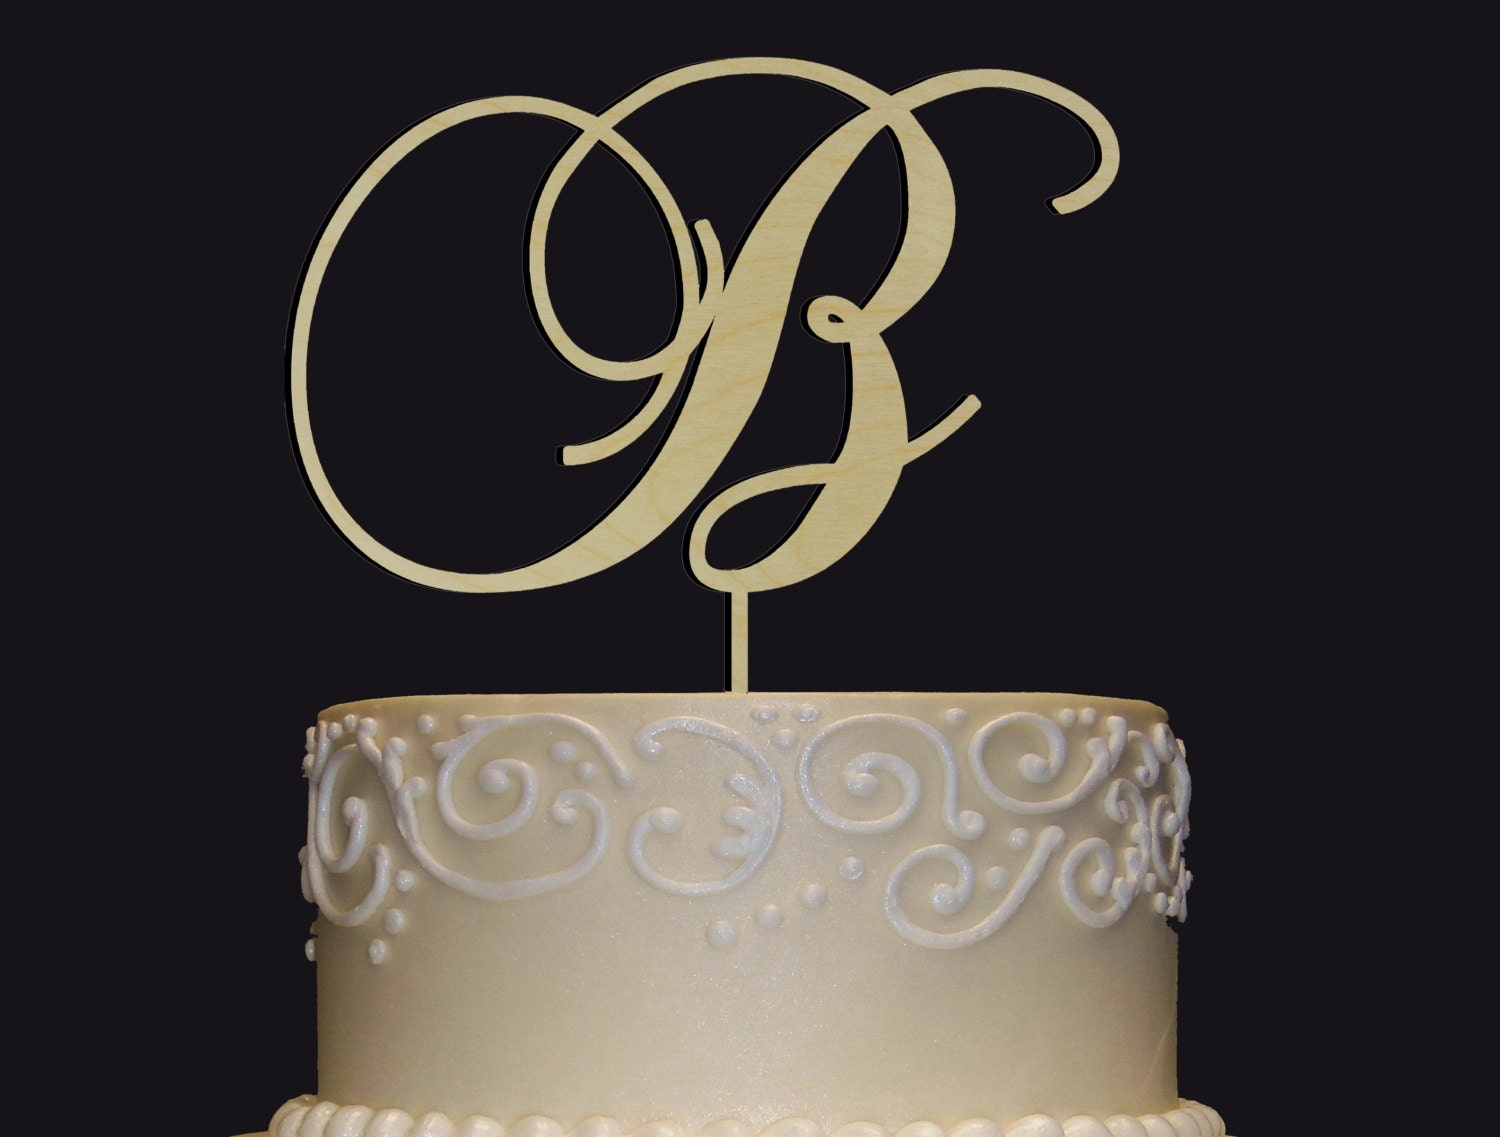 Personalized Monogram Wedding Cake Topper Rustic Chic Name Initial Letter Cake Topper For Any 